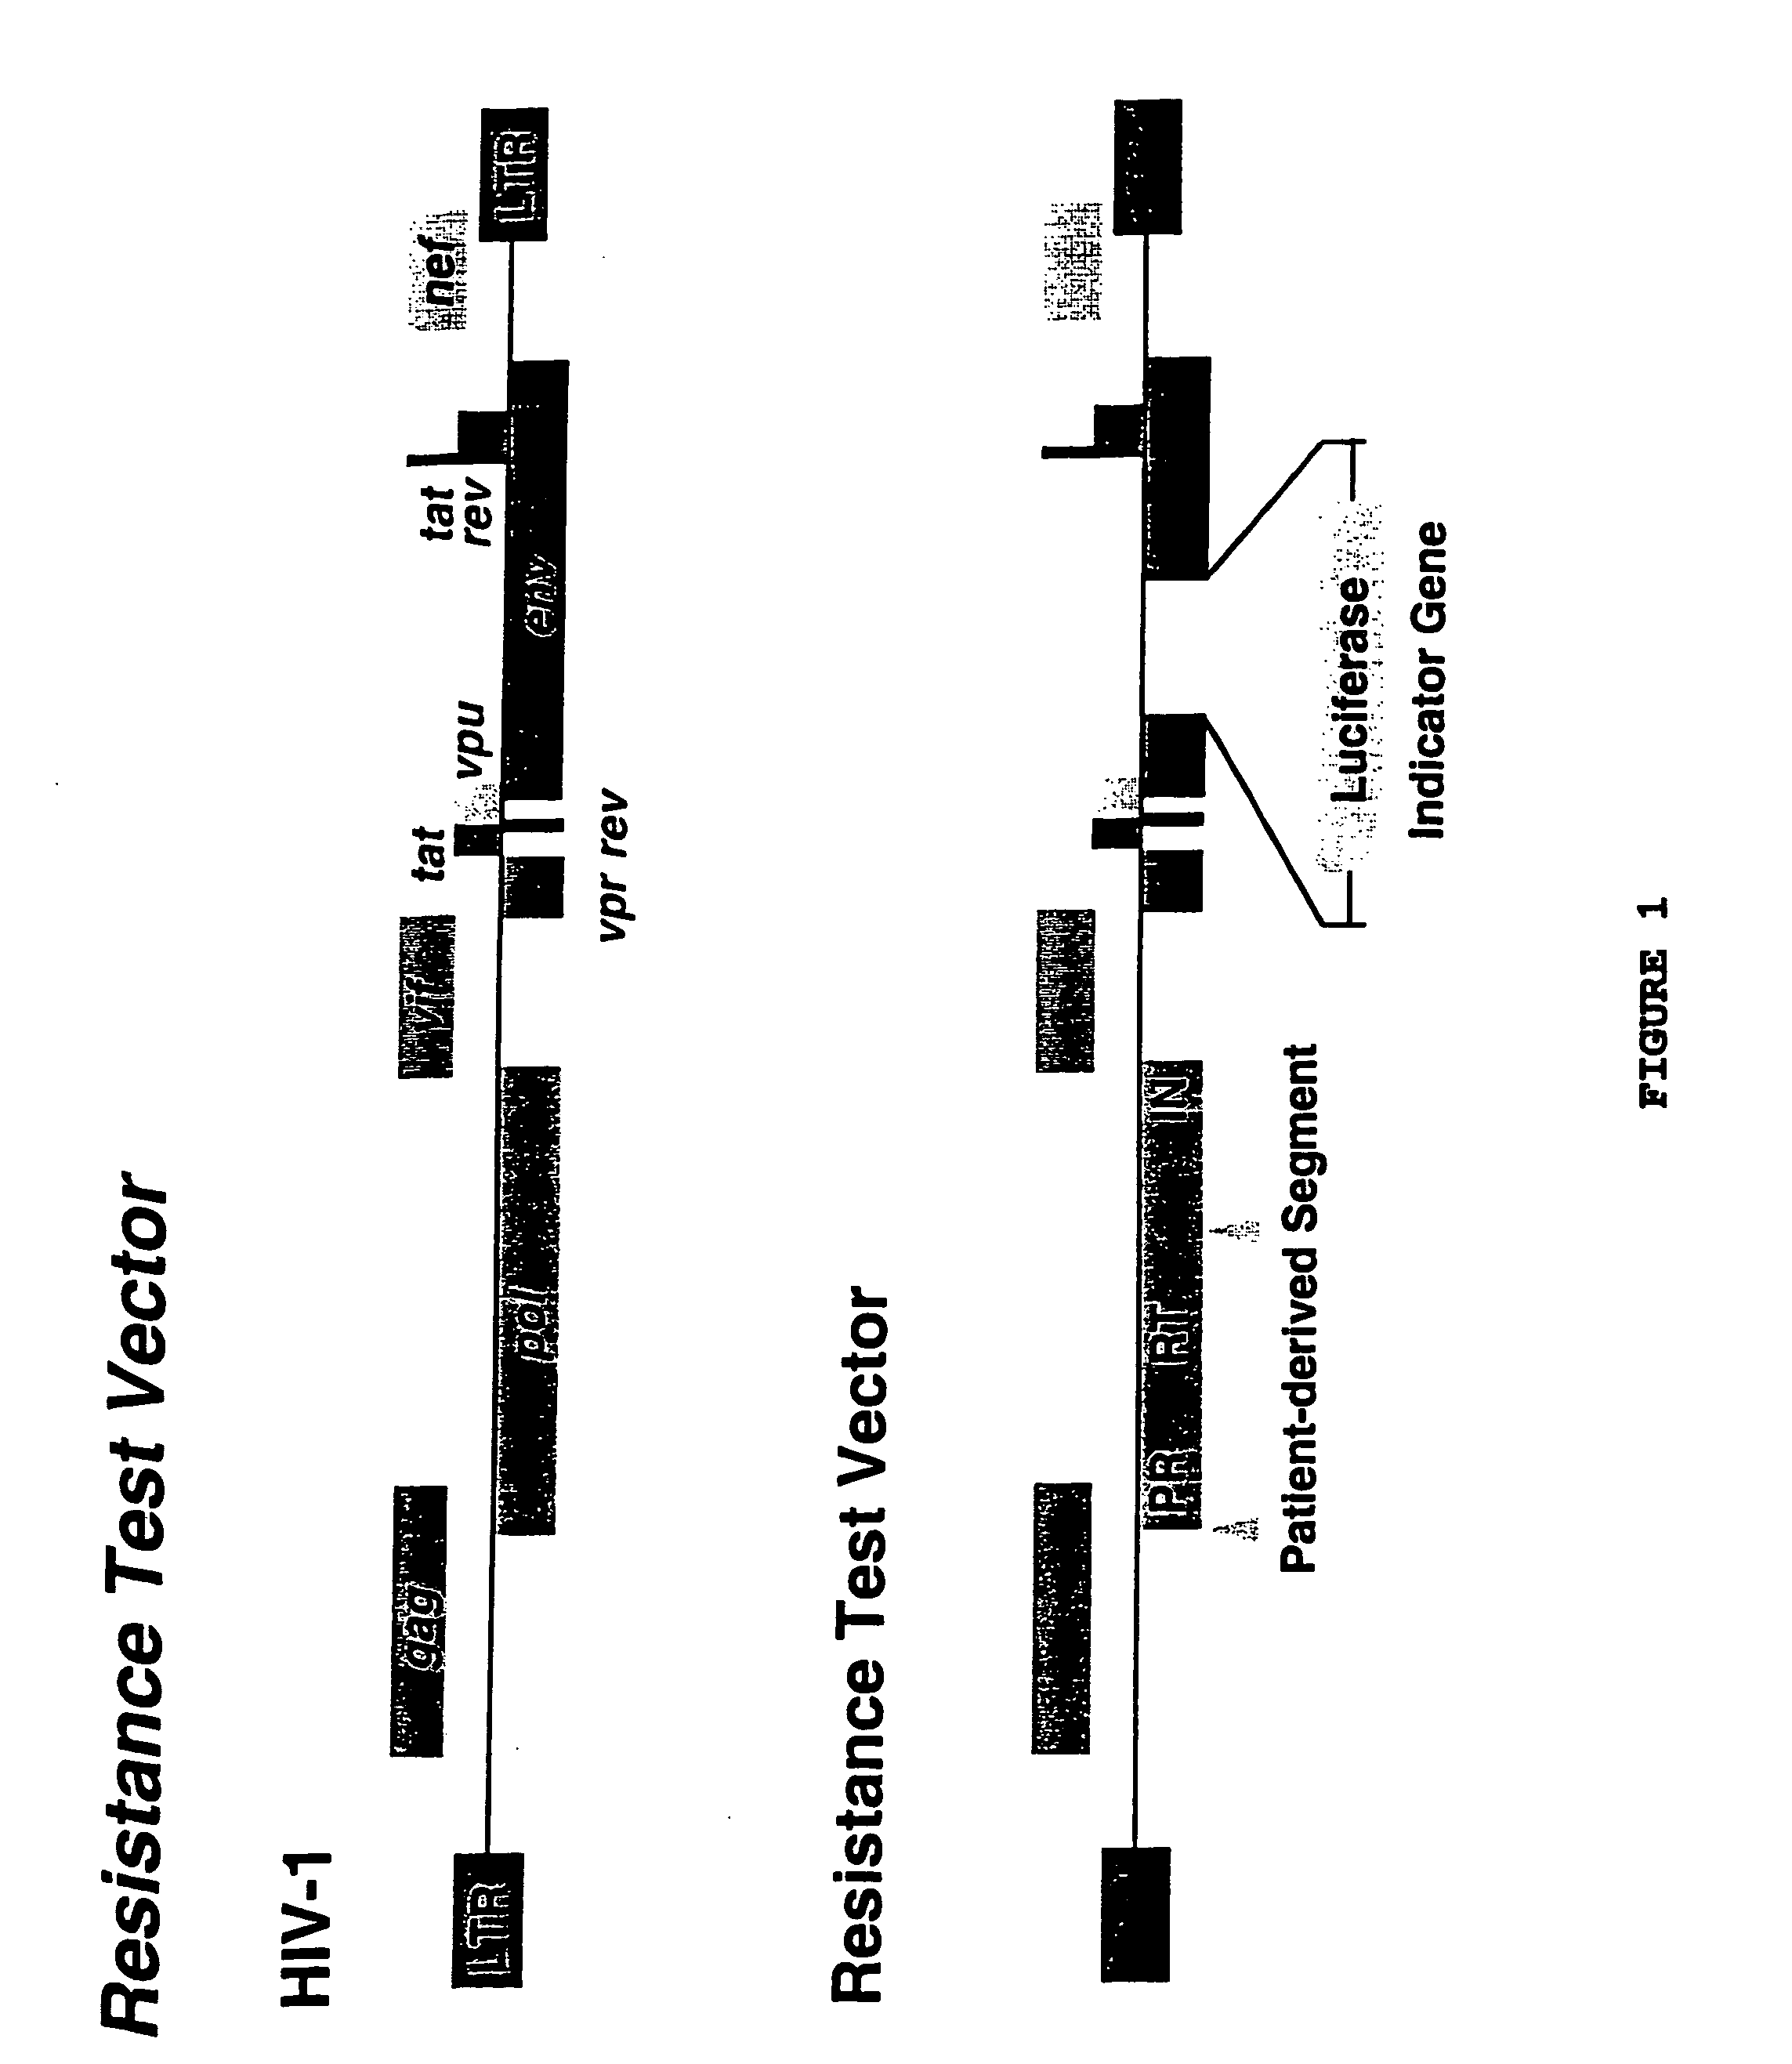 Means and methods for monitoring non-nucleoside reverse transcriptase inhibitor antiretroviral therapy and guiding therapeutic decisions in the treatment HIV-AIDS